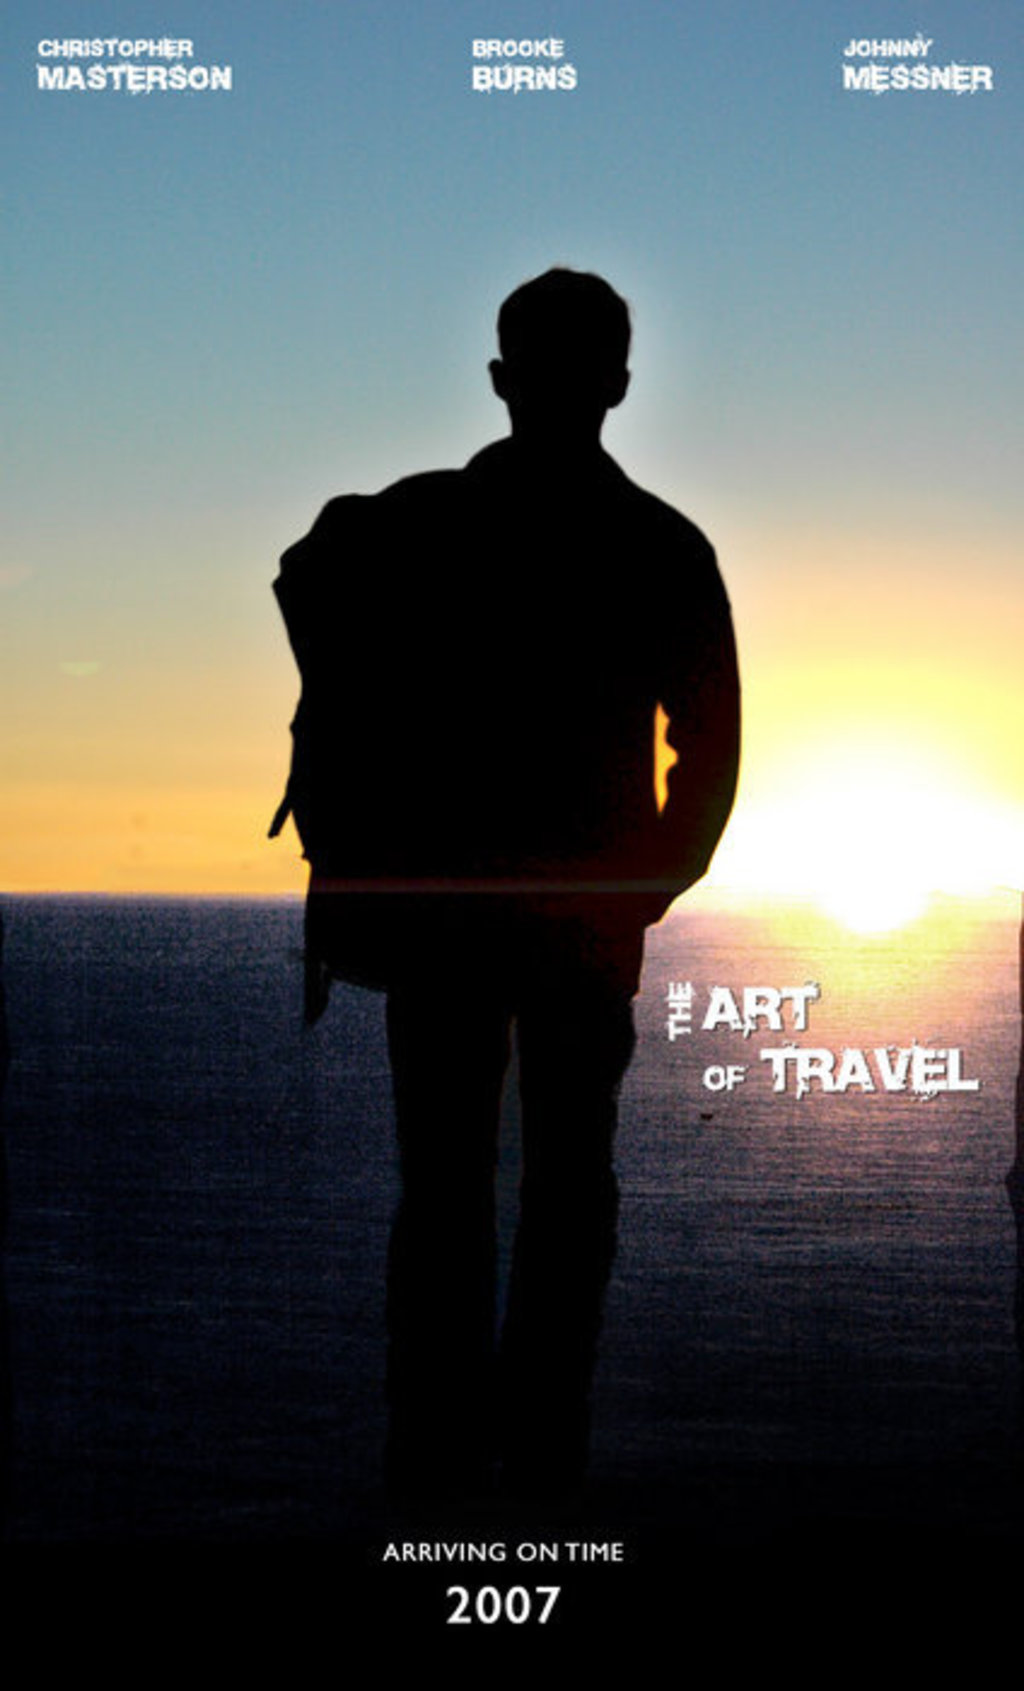 Watch The Art of Travel on Netflix Today!